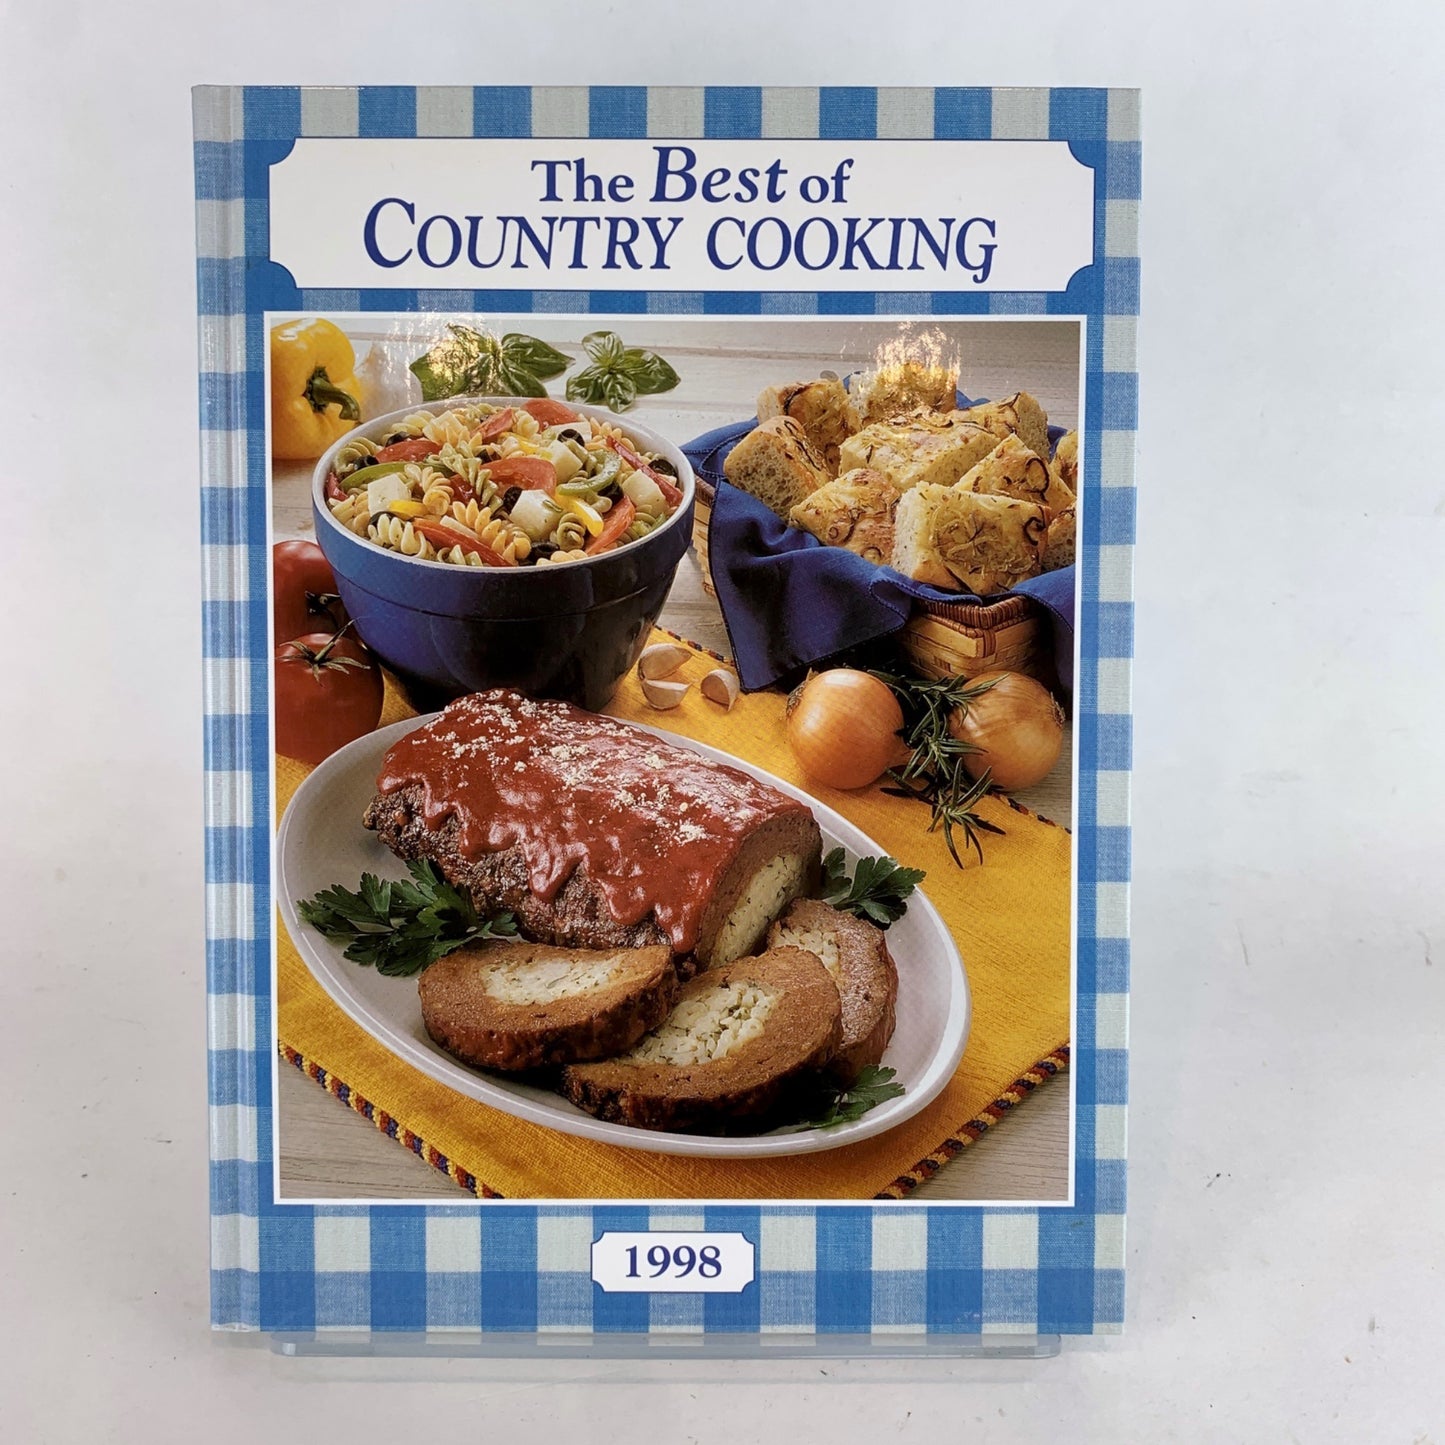 The Best of Country Cooking Taste of Home 1998 Vintage Cookbook